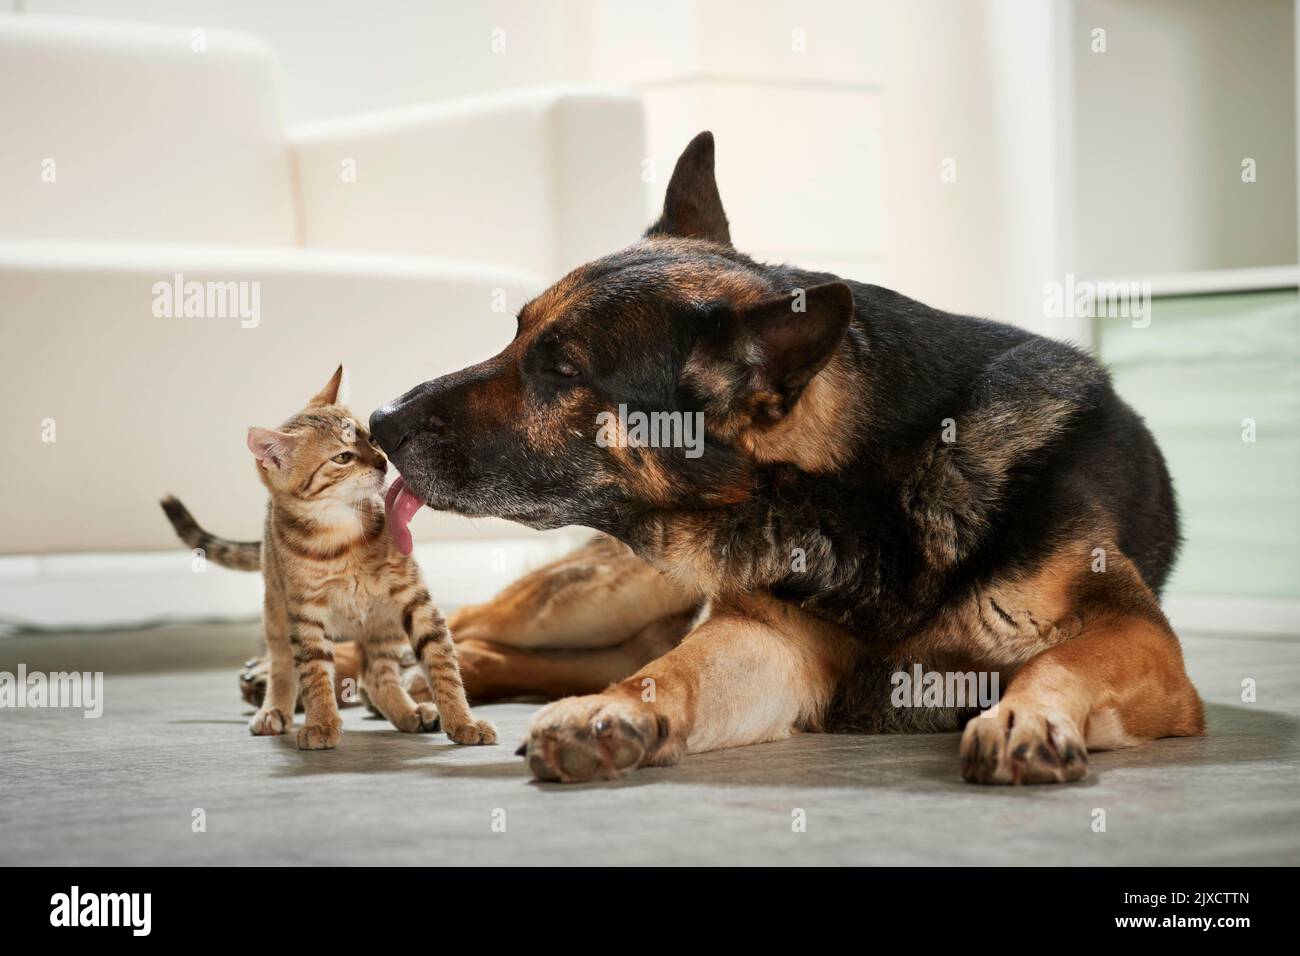 Domestic cat. An adult sheepdog gently licking a kitten. Germany Stock Photo